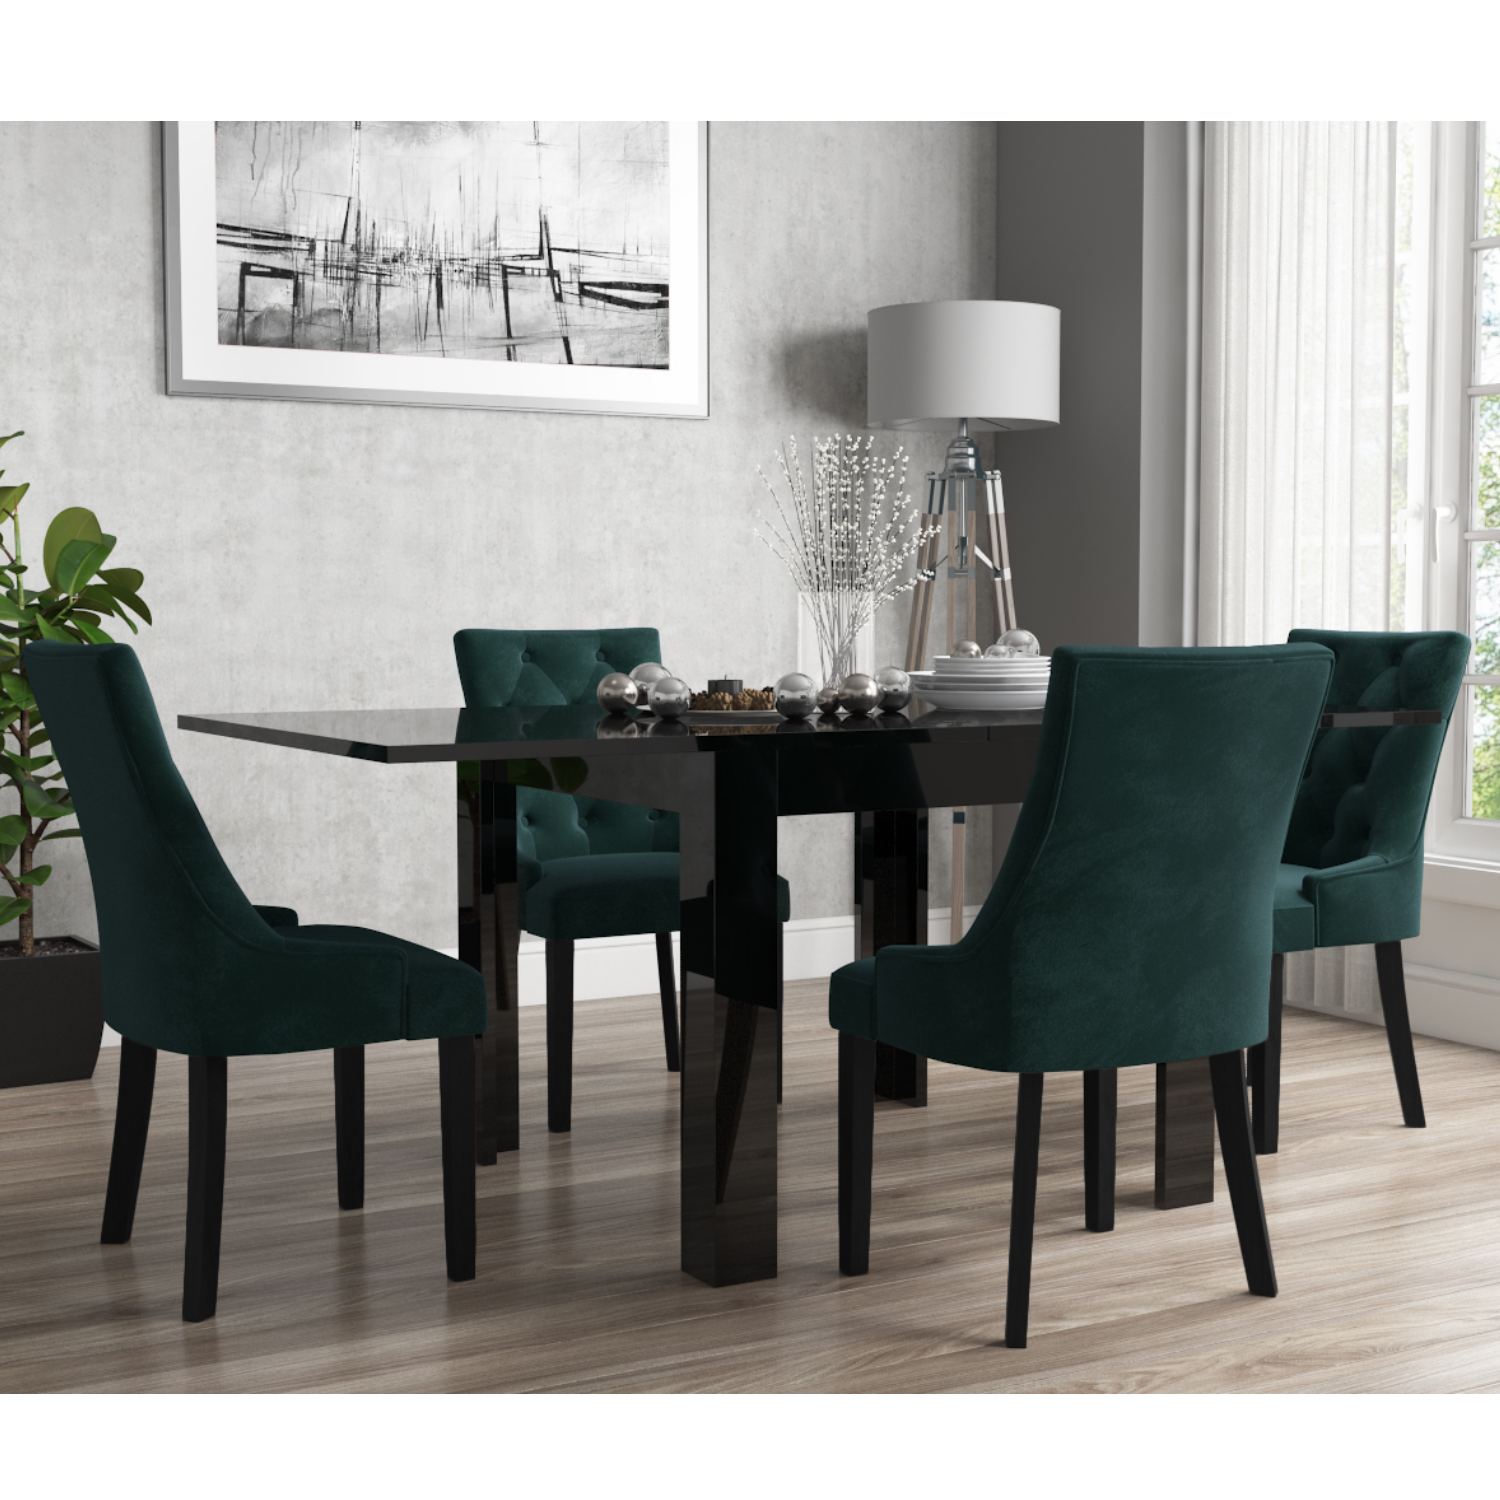 Green Velvet Chairs Vivienne Kaylee, High Seat Dining Room Chairs